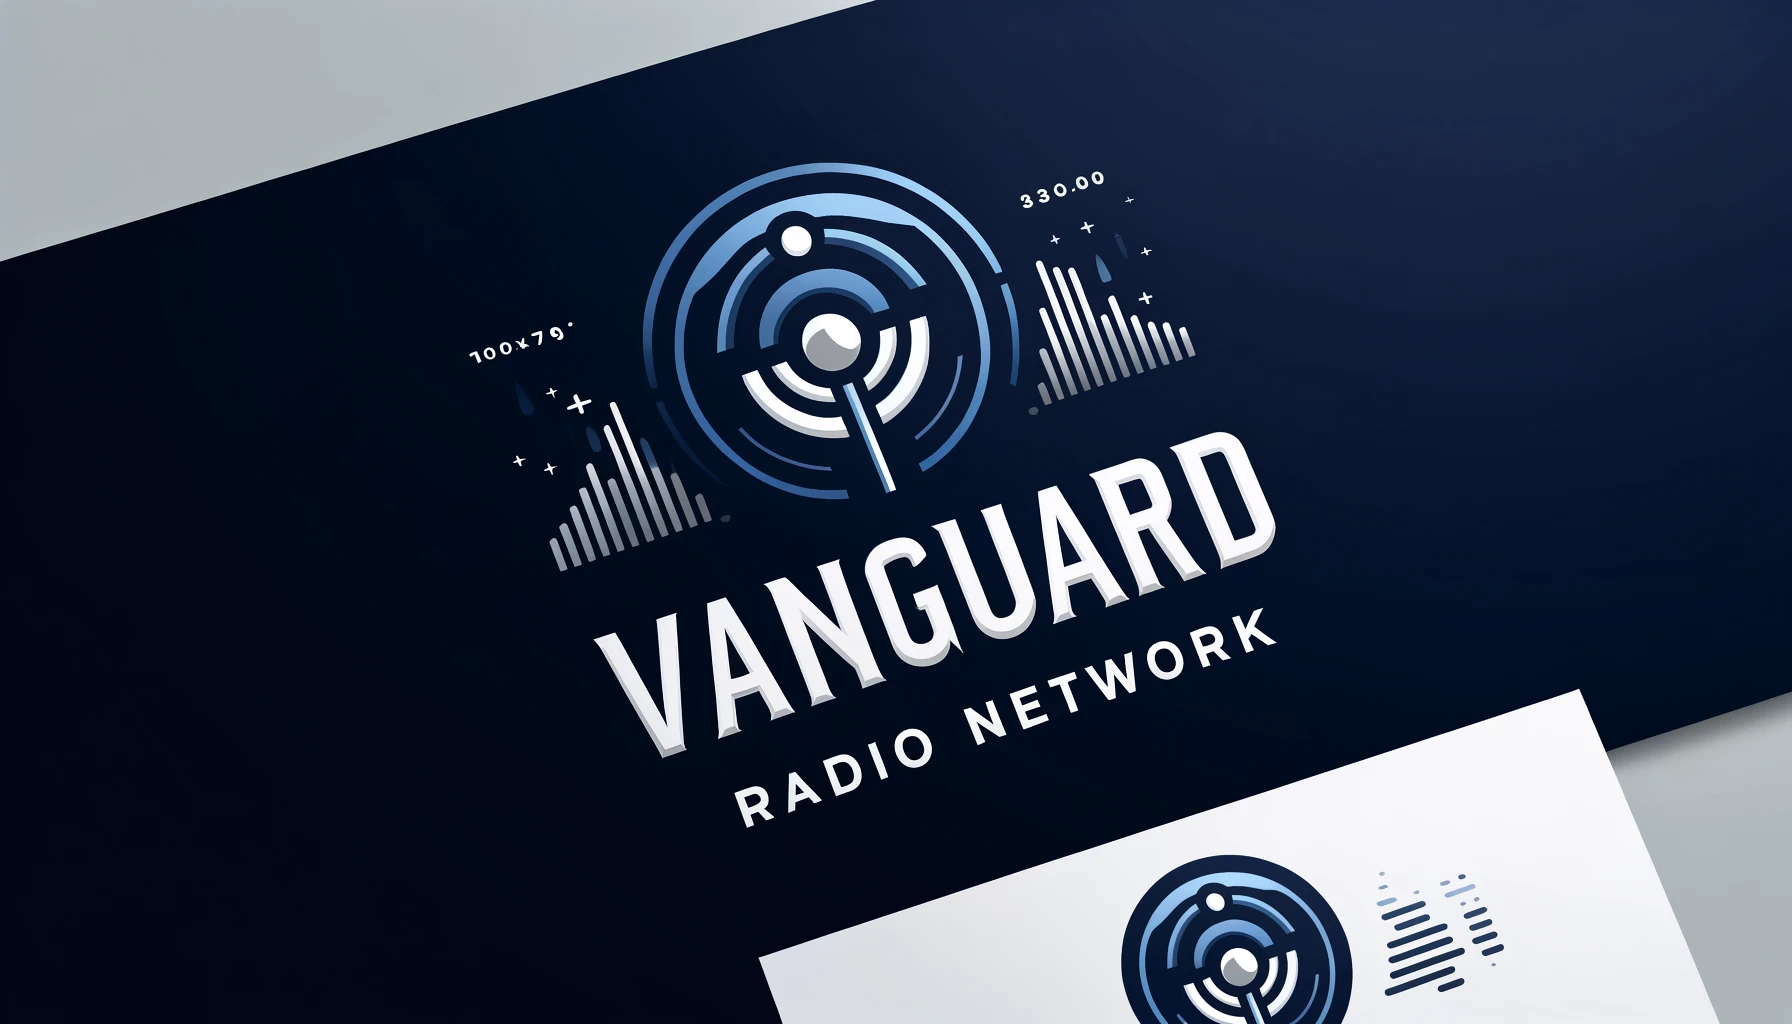 DALL·E 2024-05-05 08.53.20 – Design a sleek and professional logo for ‘Vanguard Radio Network’. The logo should be 3000×750 pixels, suitable for use on a website header or large f